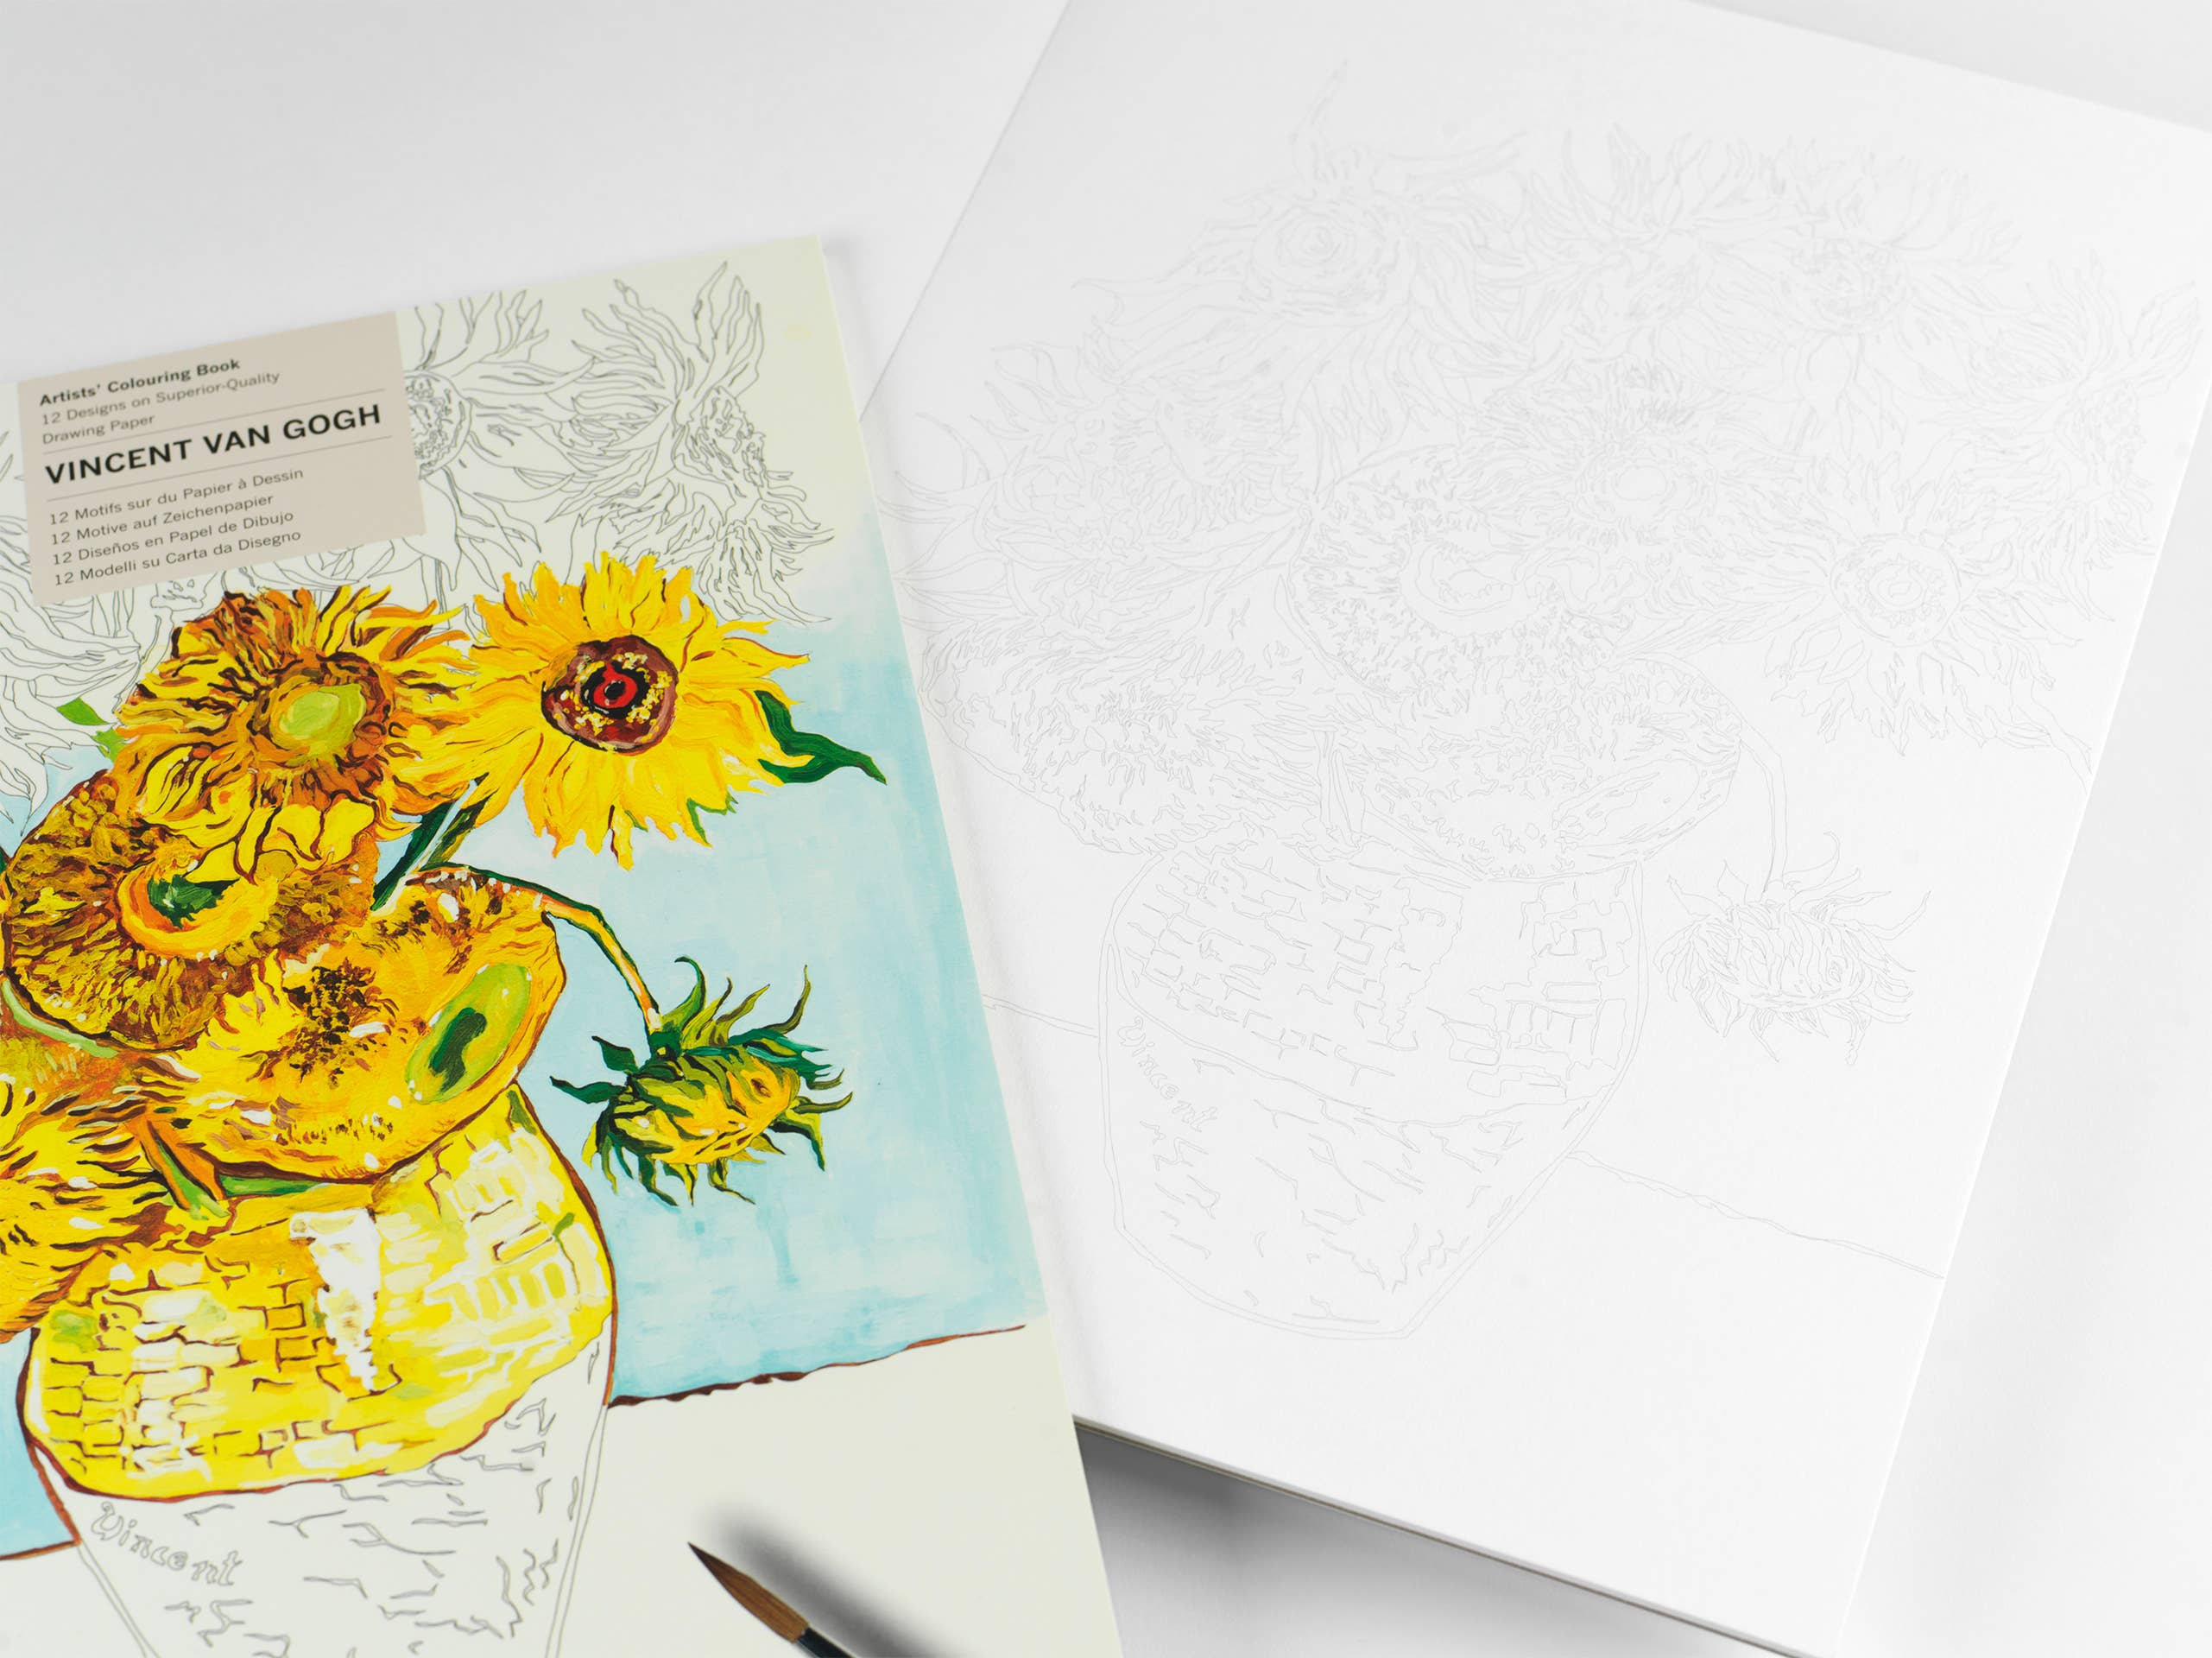 Van Gogh Dreams: A Vincent Van Gogh Inspired 16 Page Professional Colouring Experience